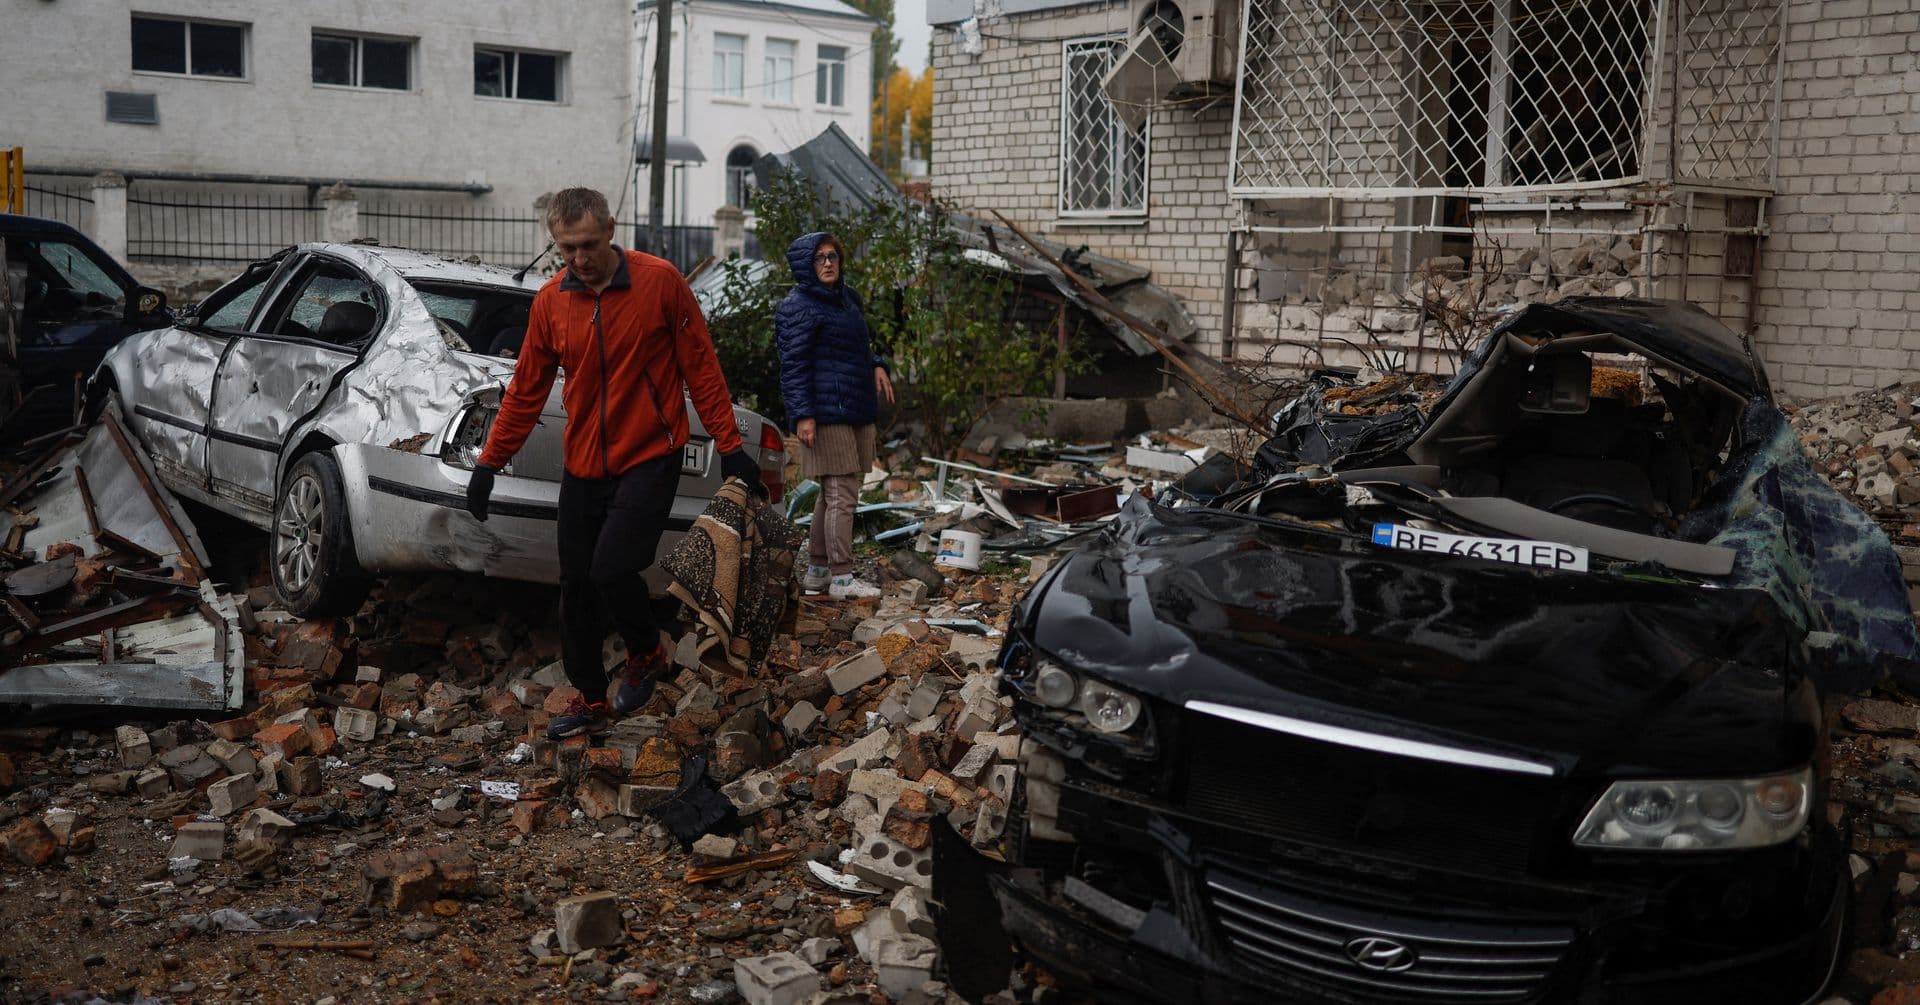 A local resident walks past cars damaged by a Russian missile attack in Mykolaiv